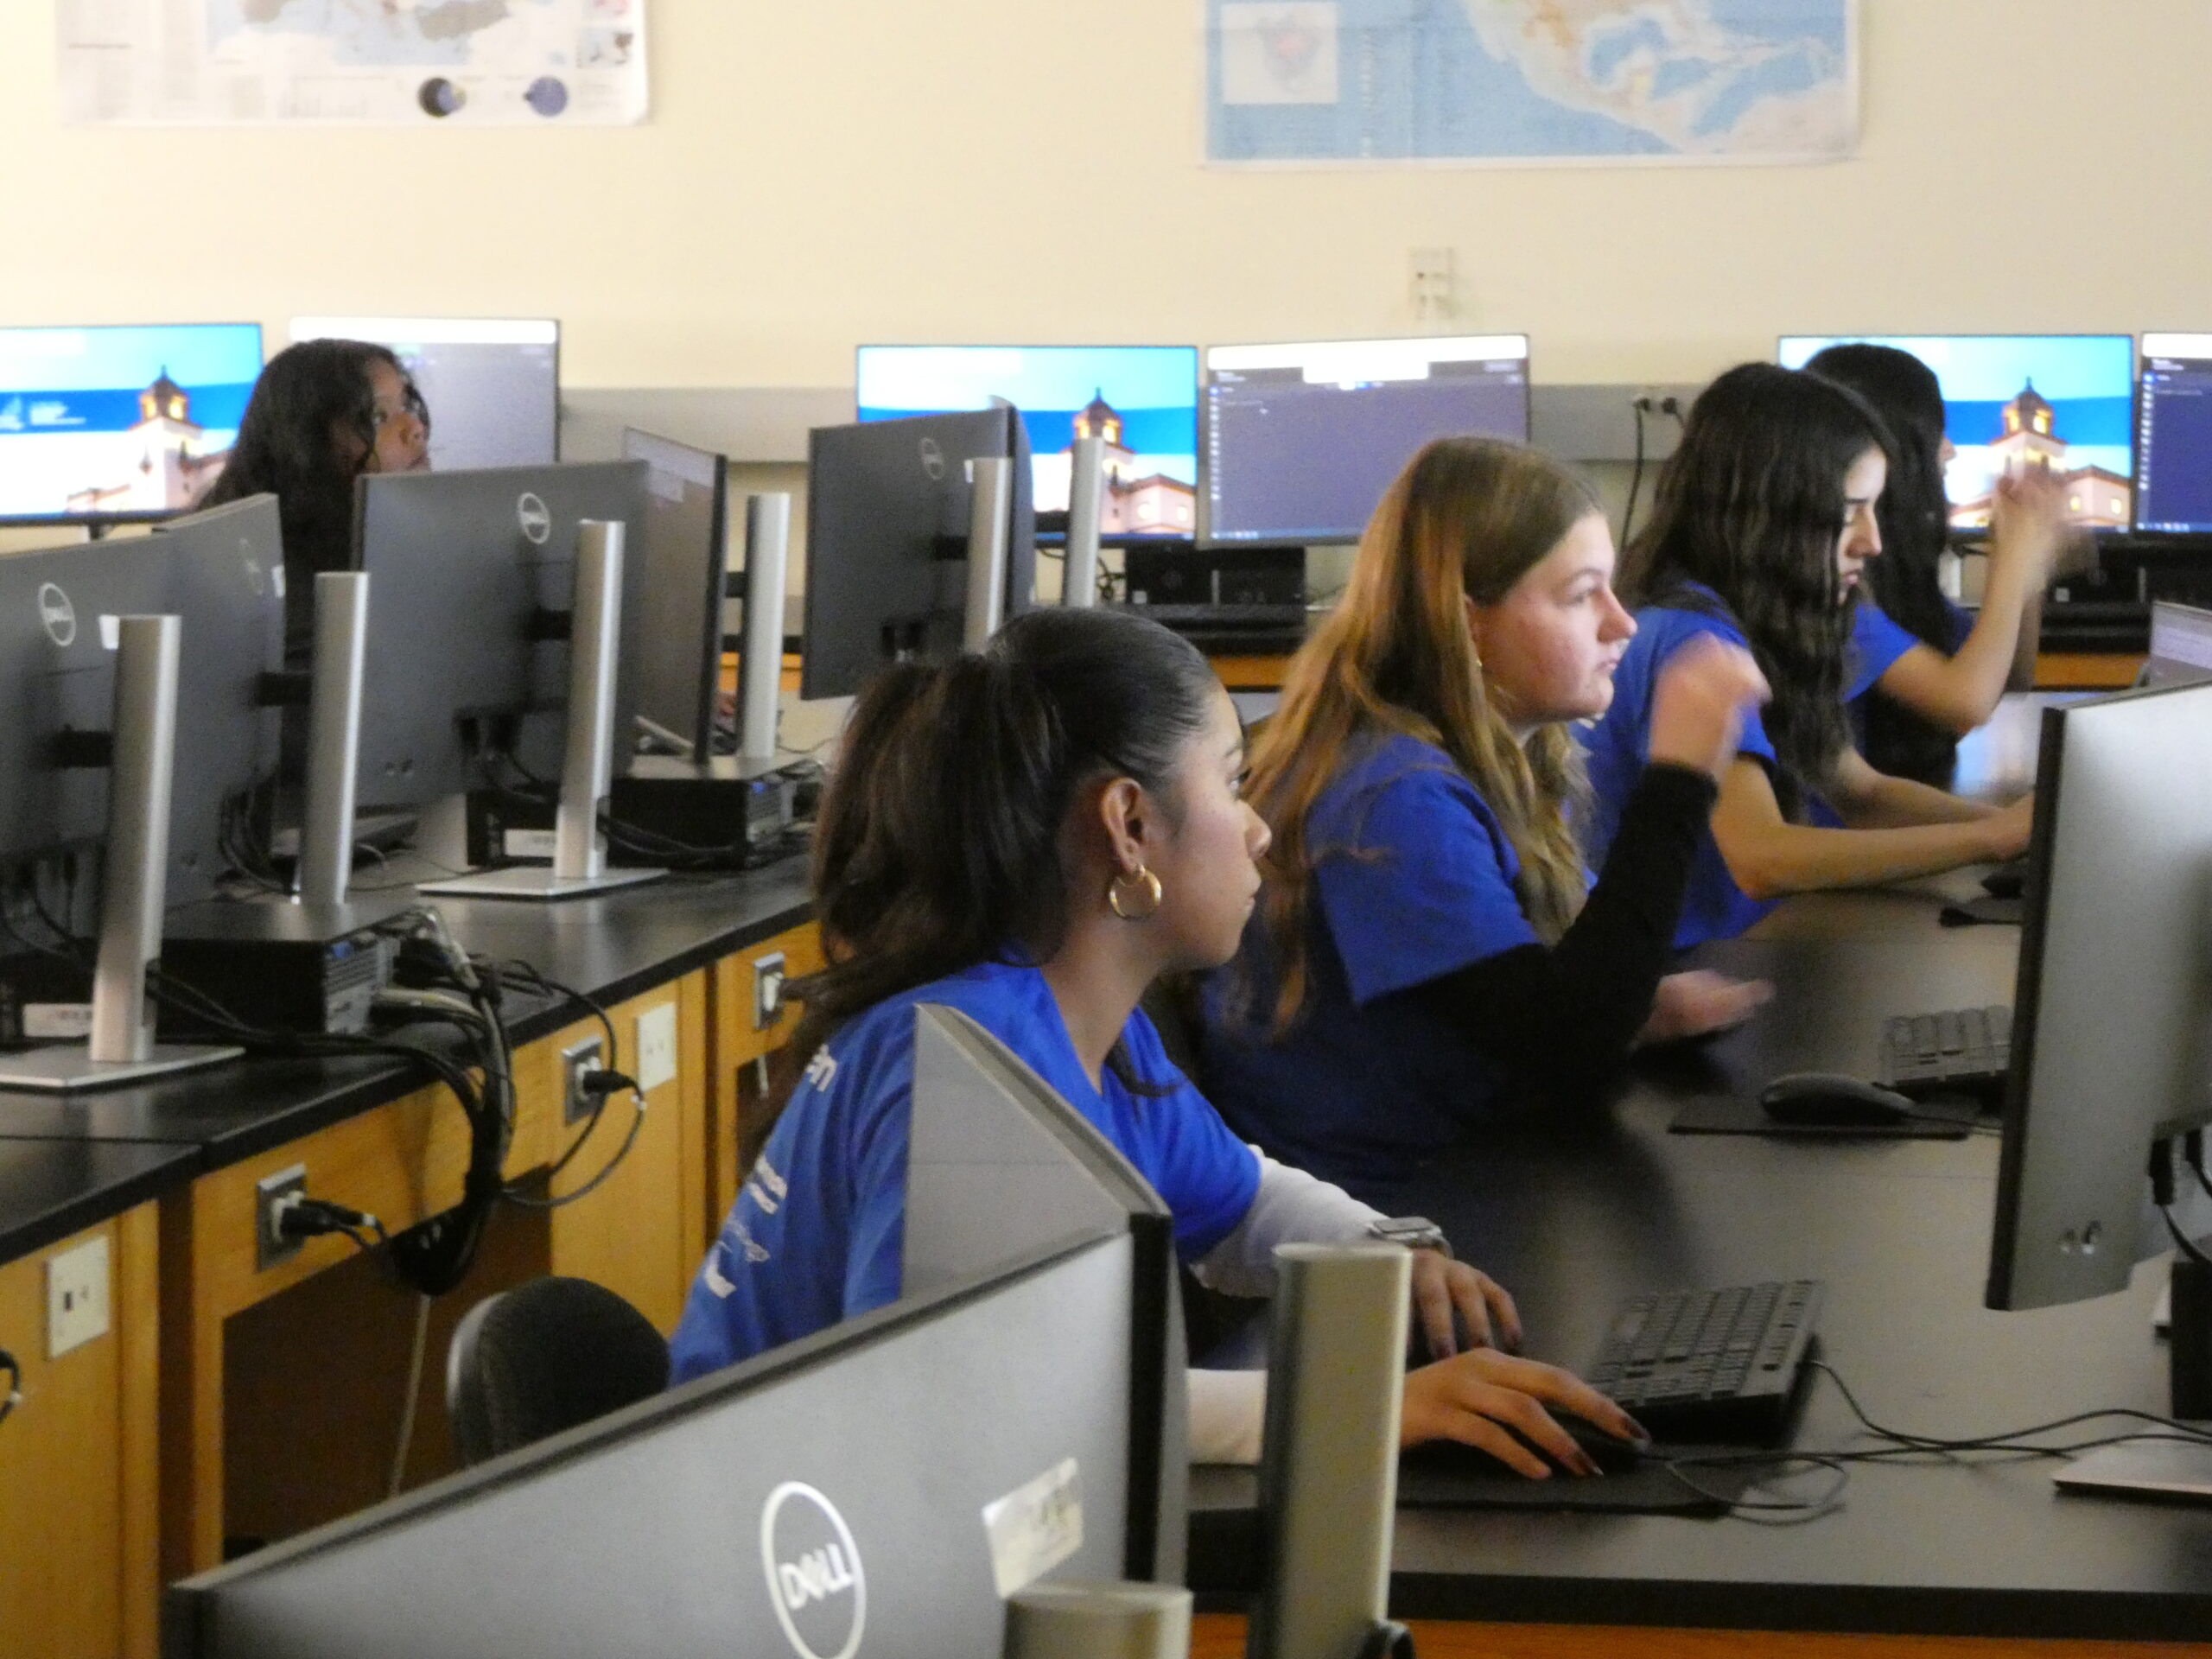 Students looking at their computer screens